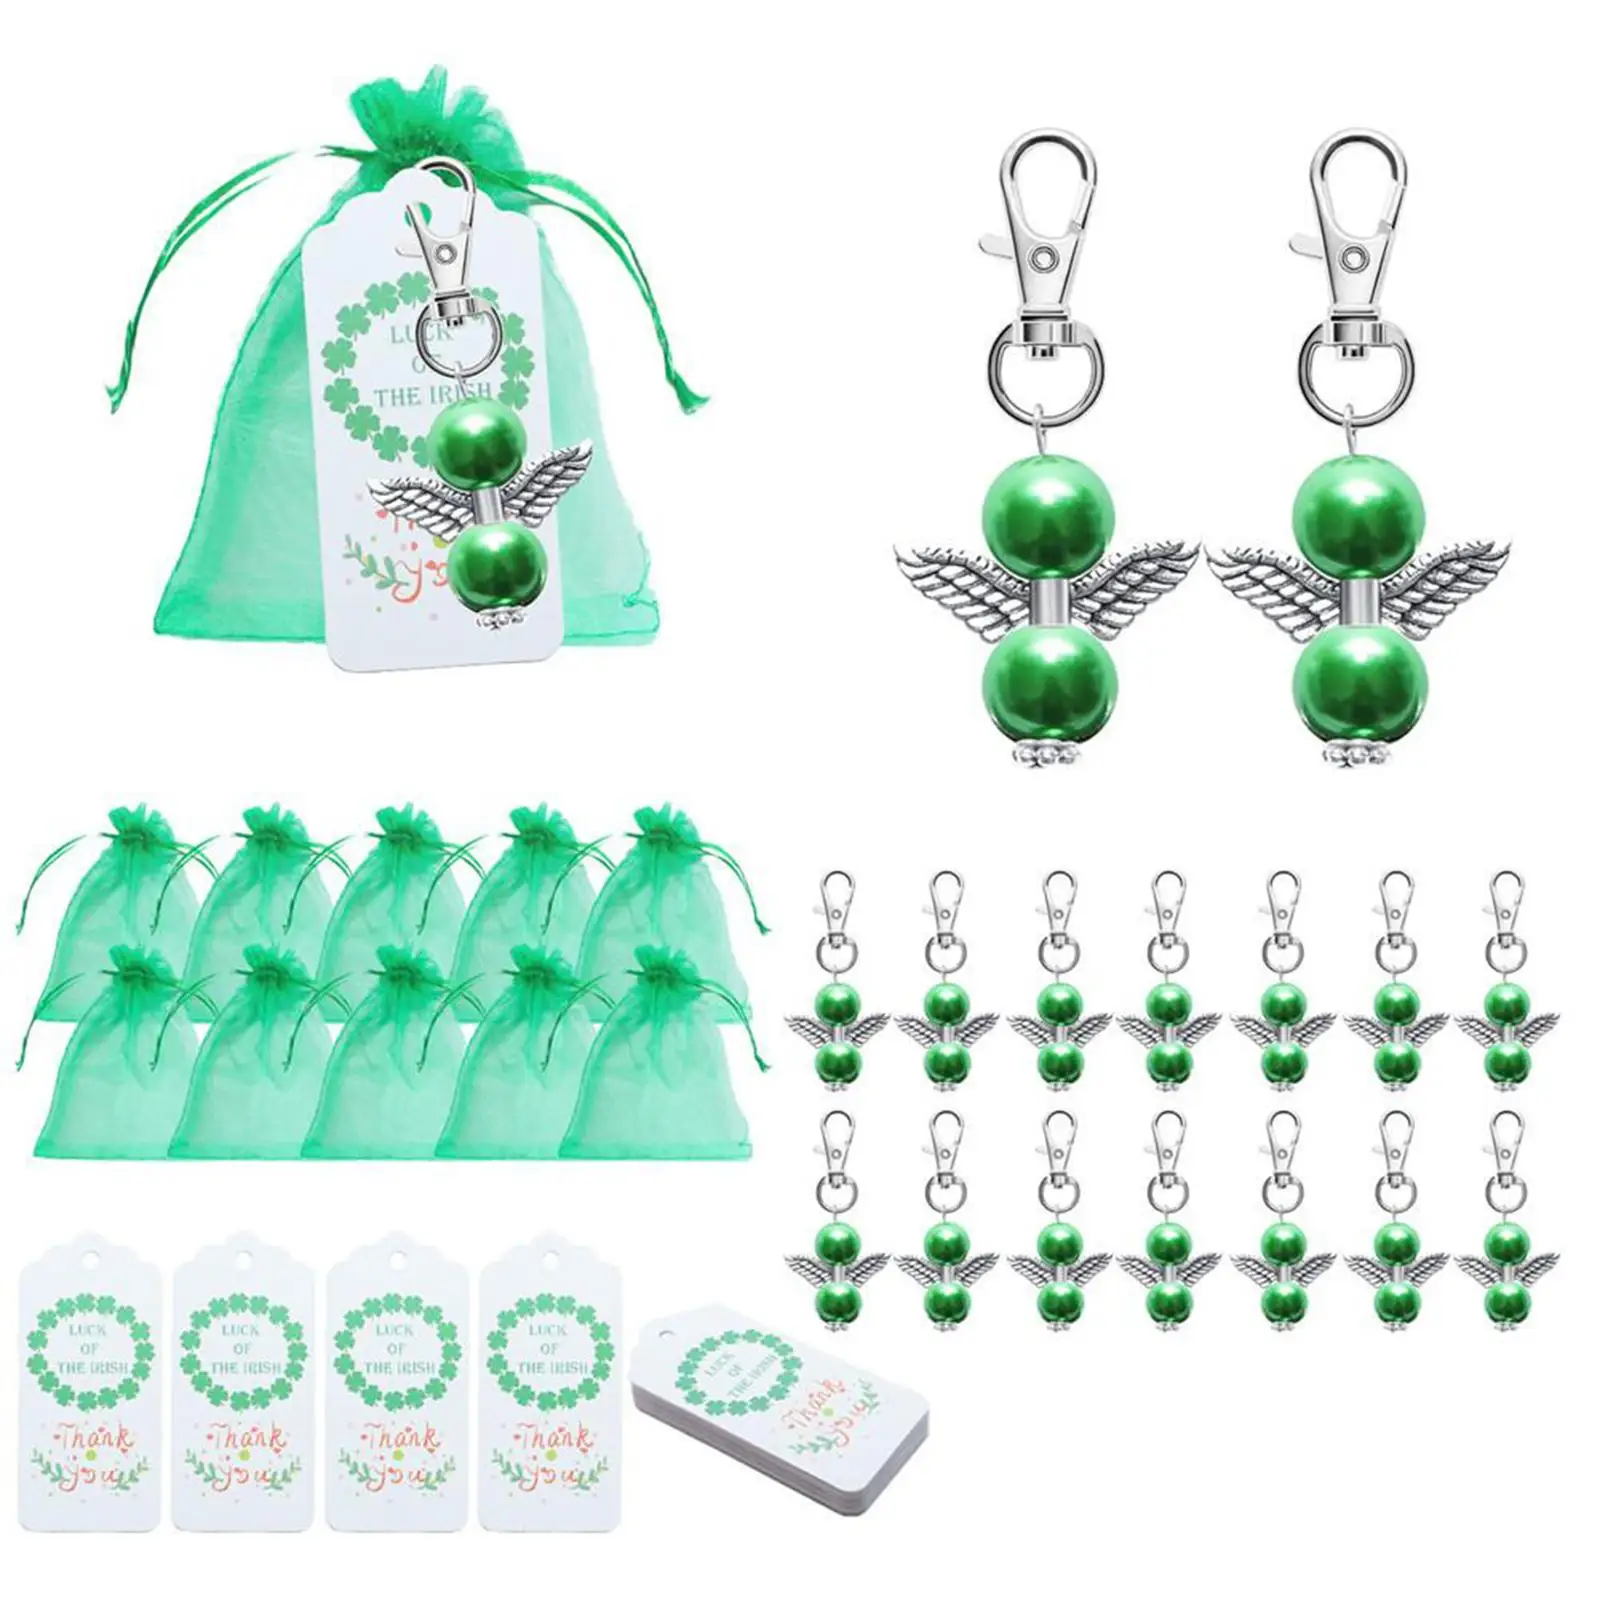 60 Pieces Angel Design Keychain Favors Set Include Angel Pearl Keychains White